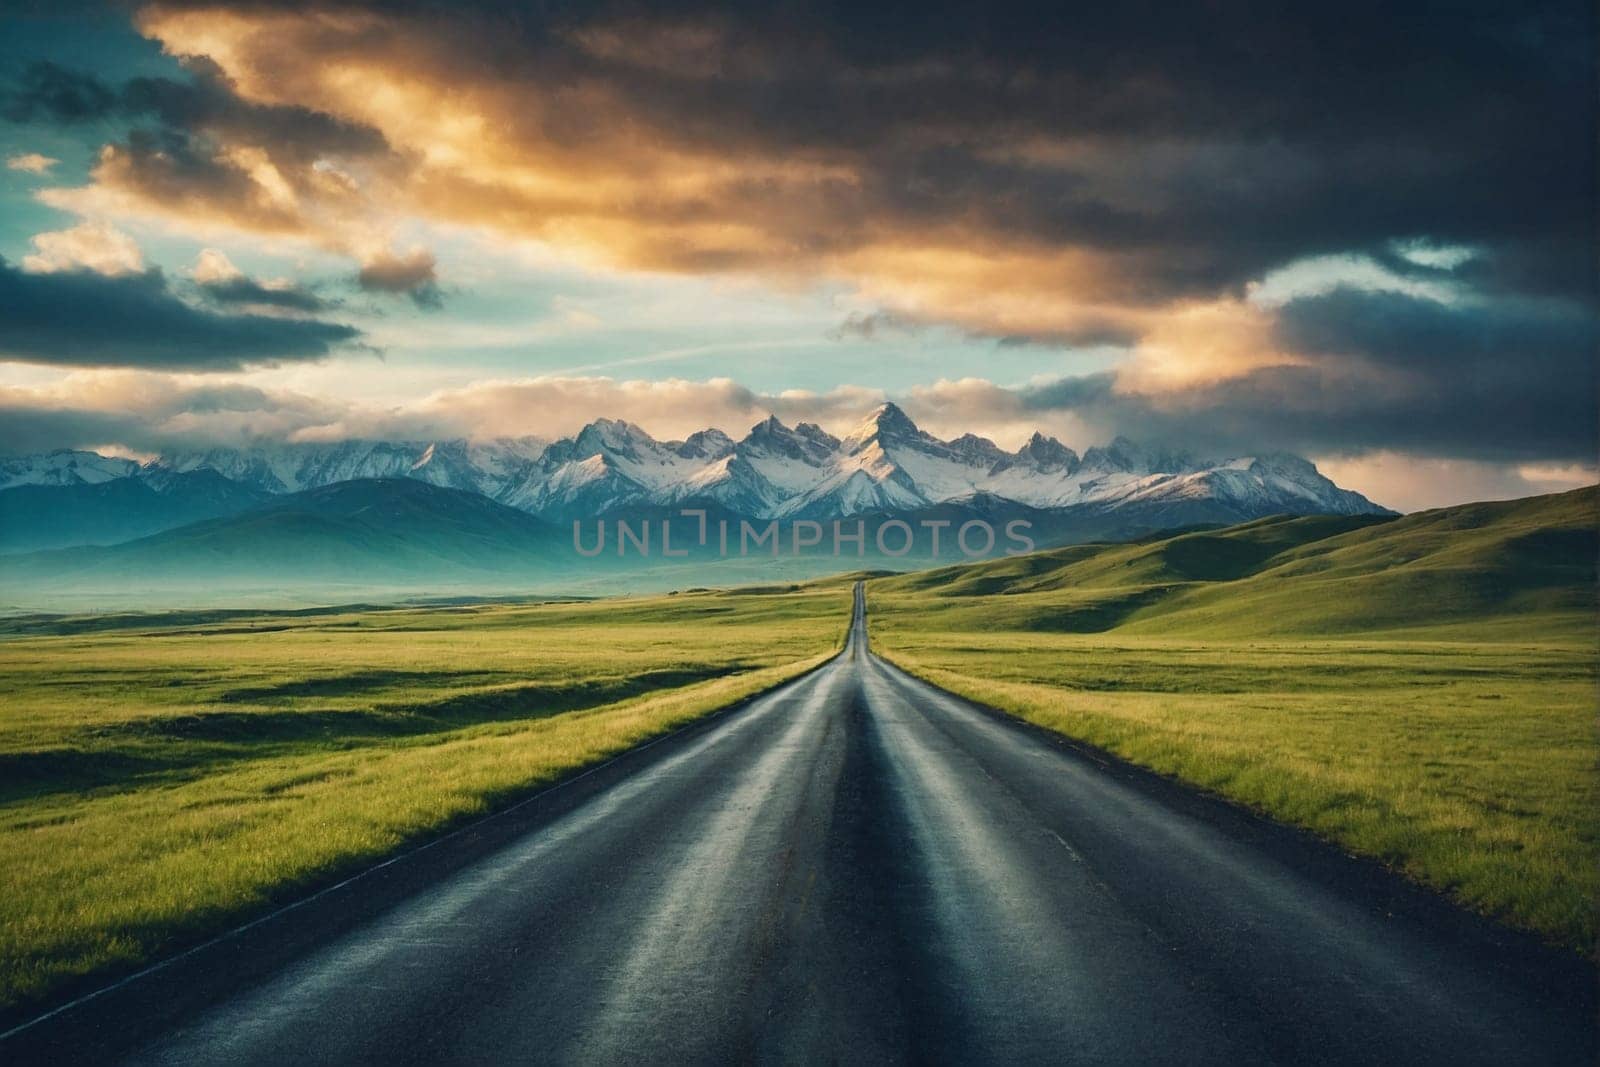 A long, empty road extends into the distance, framed by towering mountains in the background.